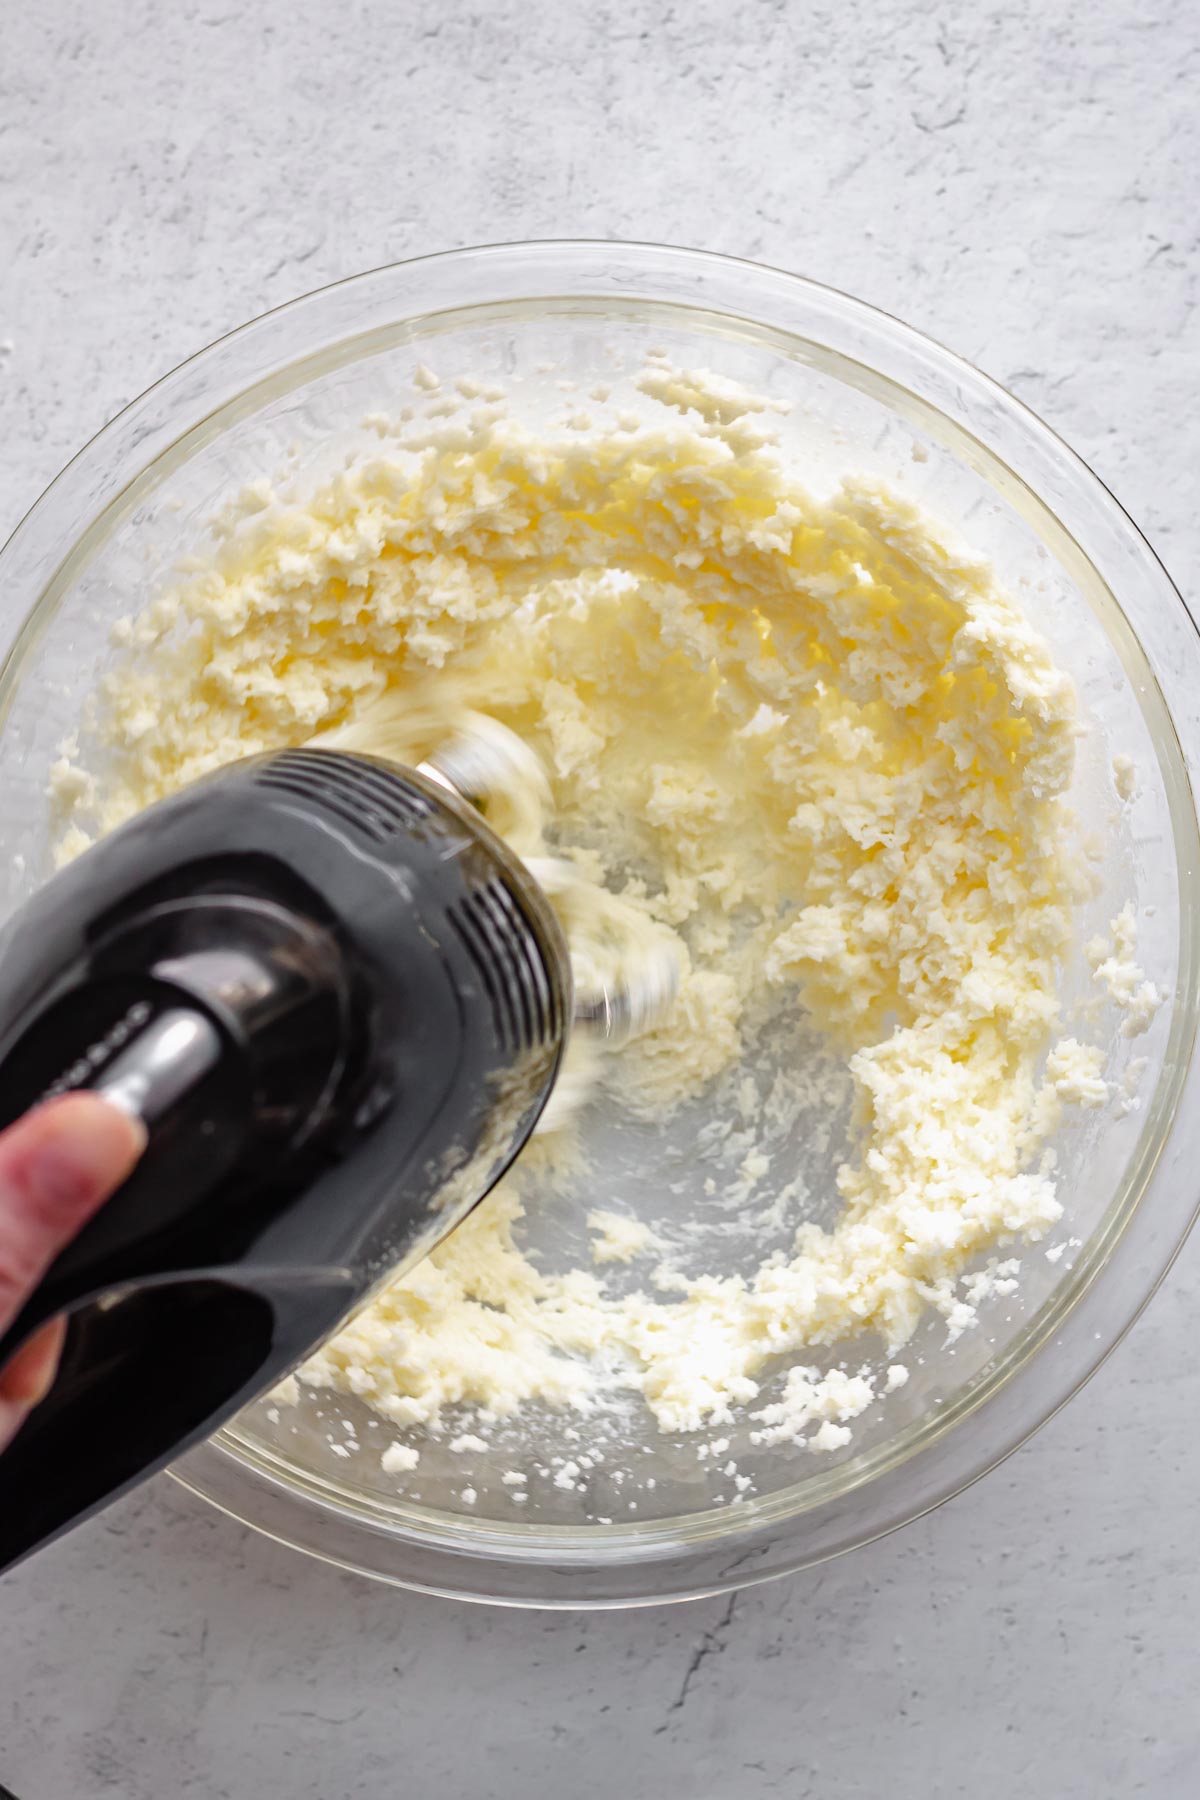 Butter and sugar beating together with a hand mixer